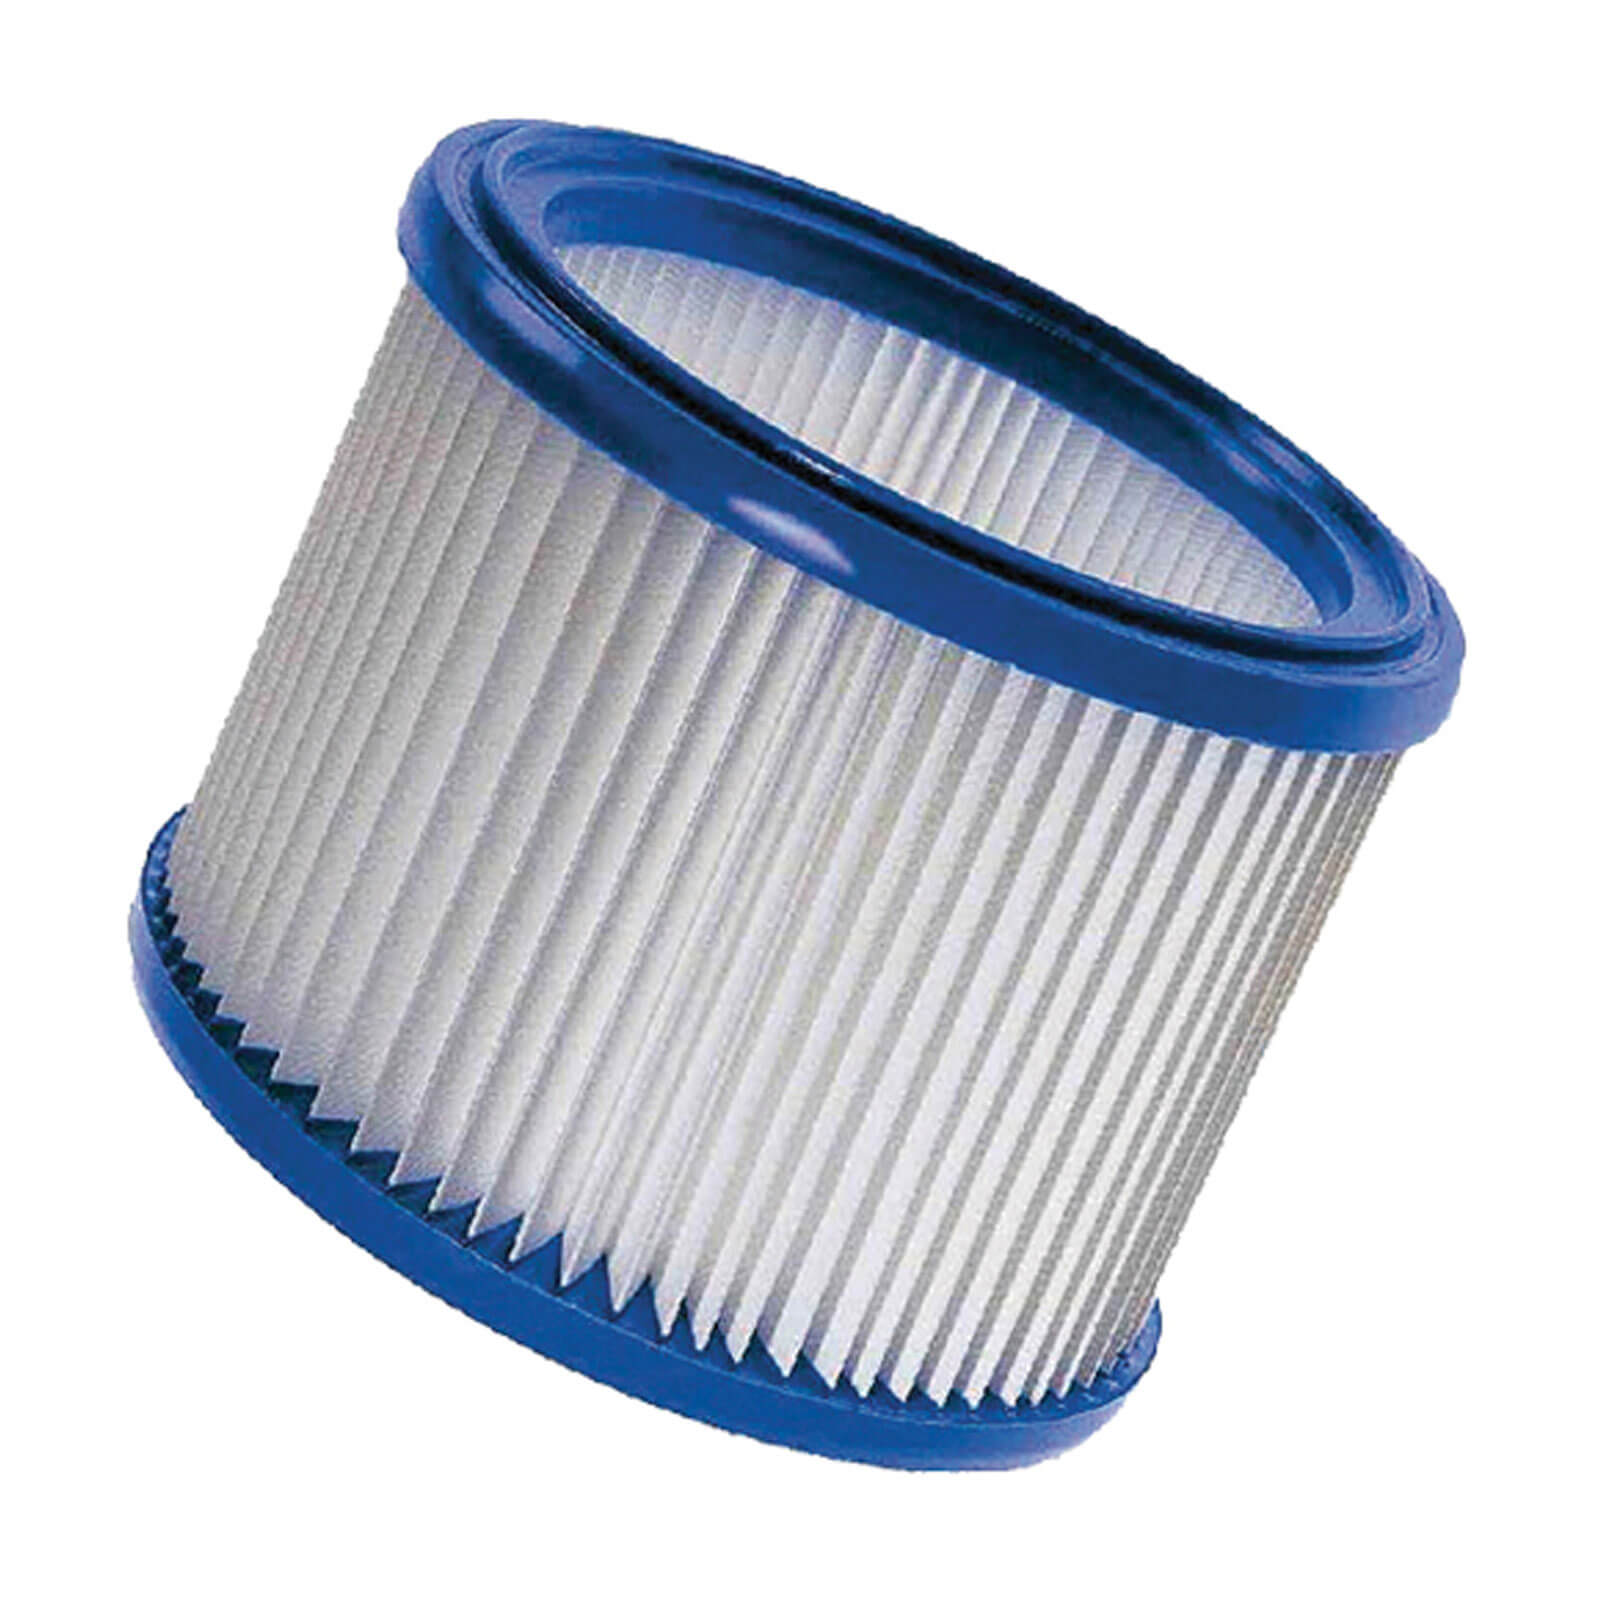 Makita Filter Cartridge for 446L, VC2012L, VC2511, and VC3011L Vacuum Cleaners